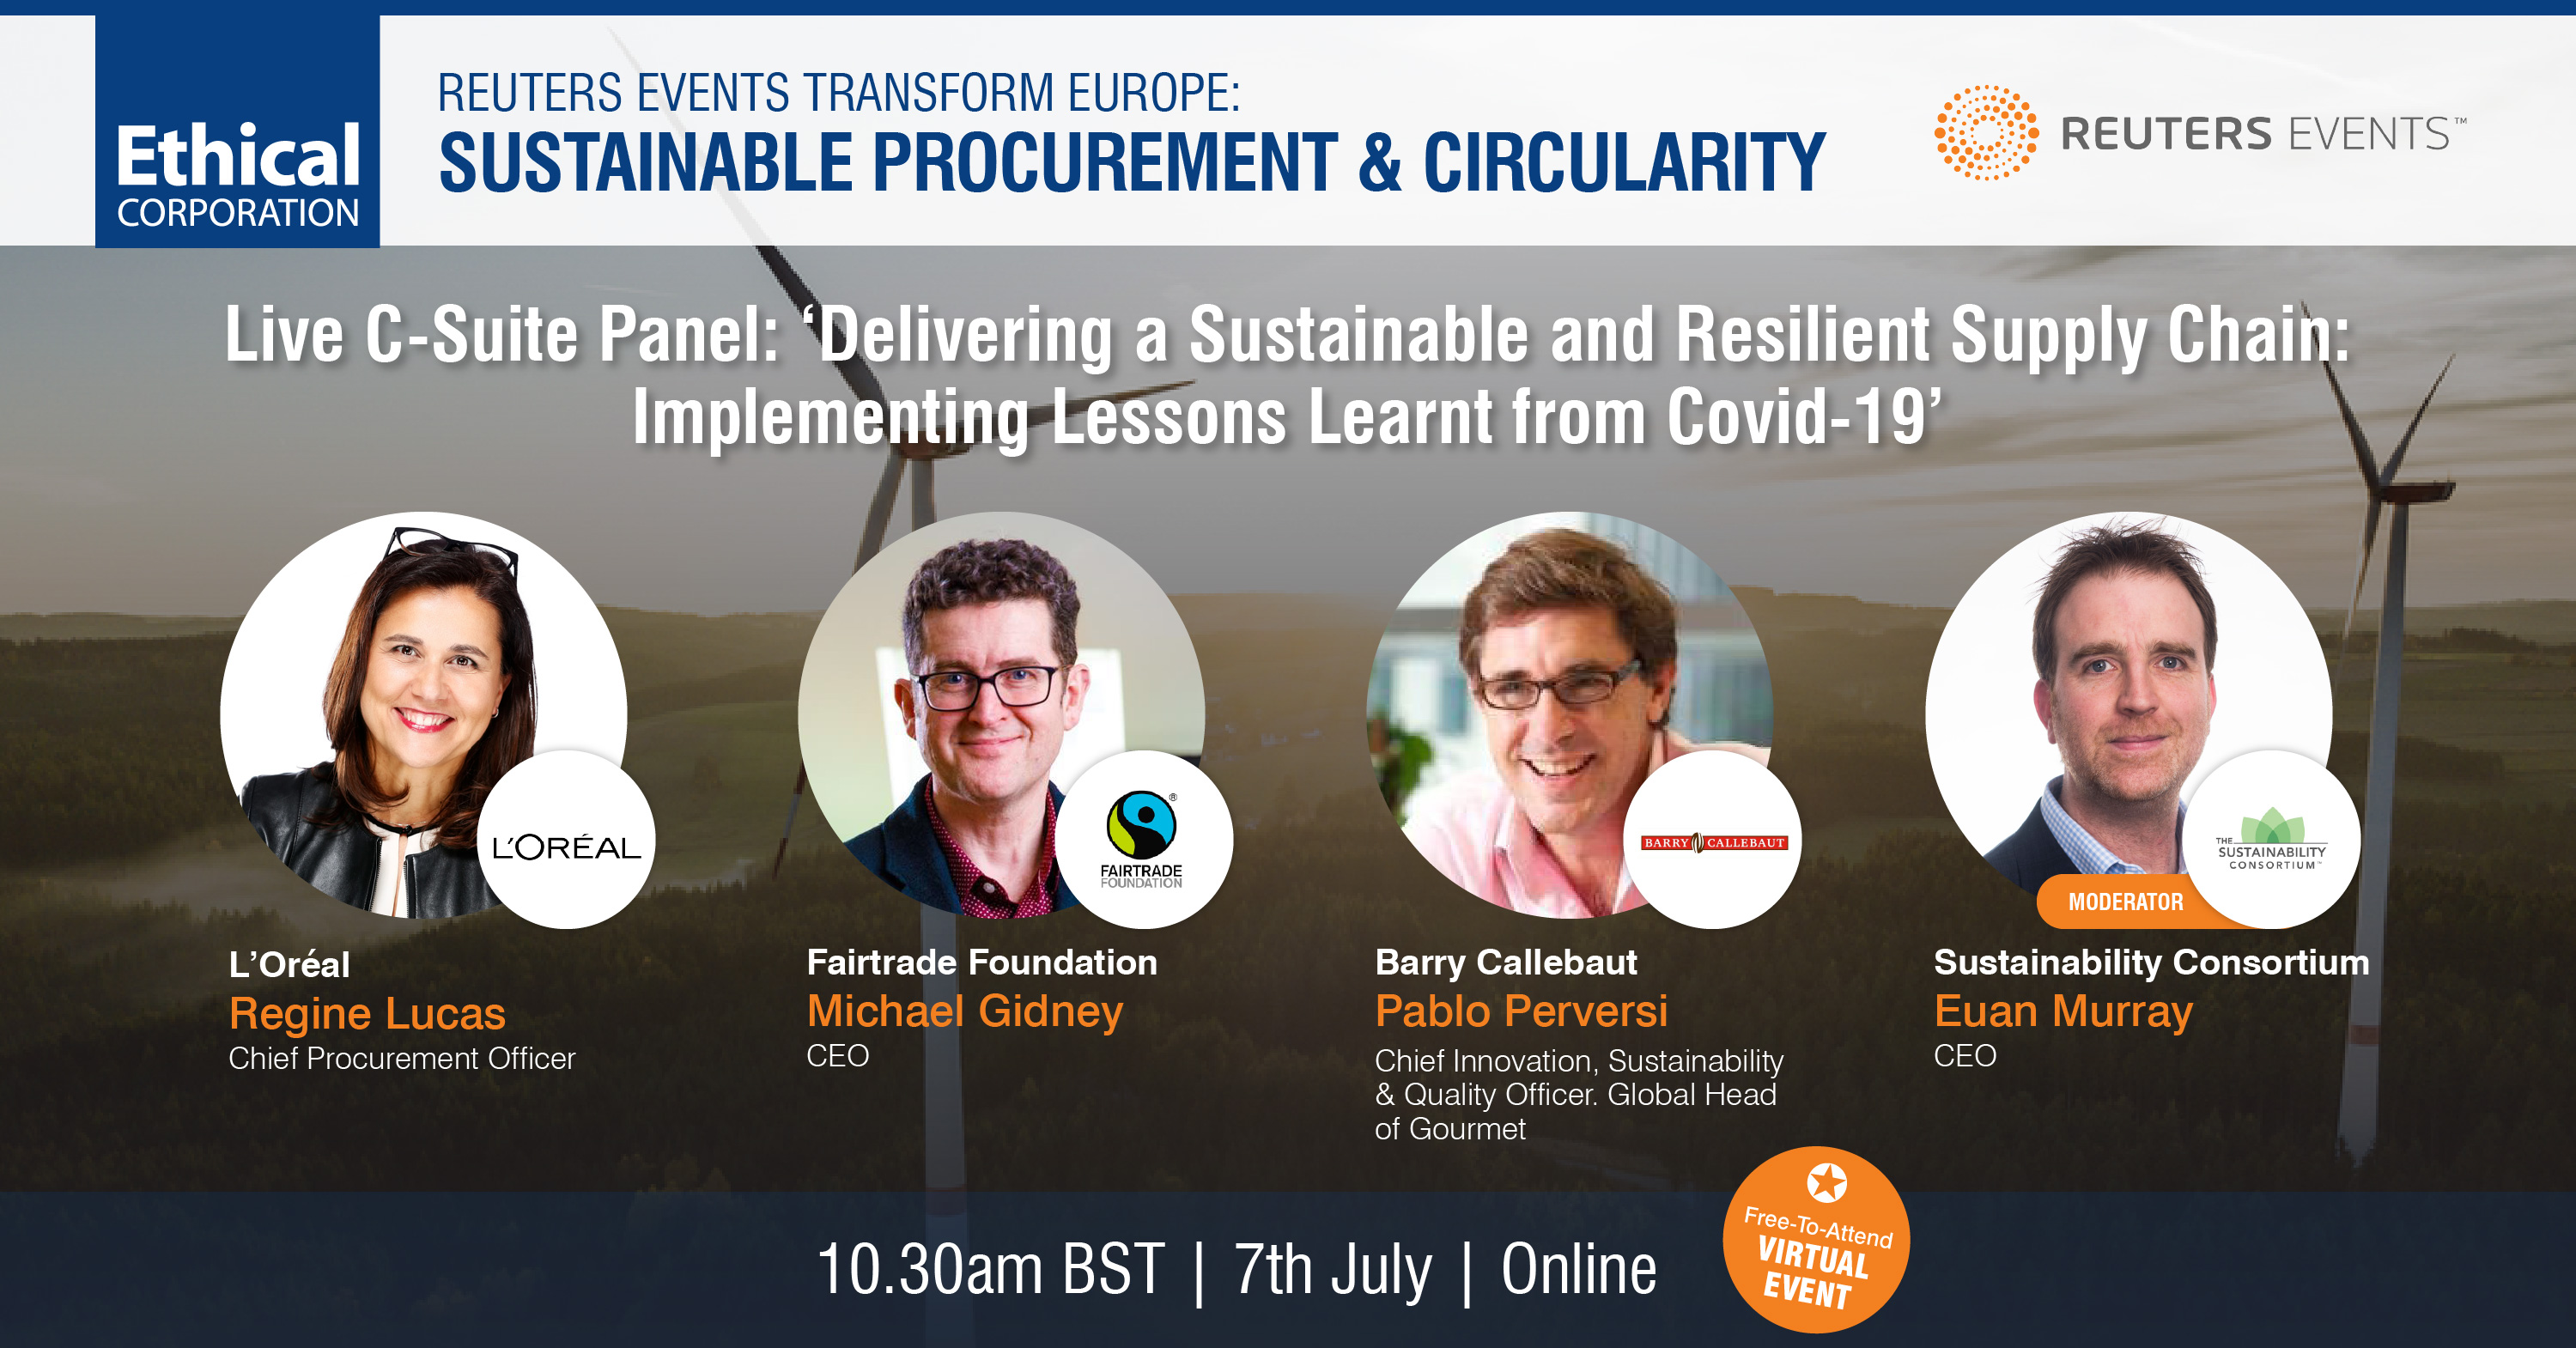 Article about Press Release: Leaders from UNFCCC, PepsiCo, Novo Nordisk, Fairtrade Foundation and B Lab Join us at Transform: Sustainable Procurement & Circularity this July 